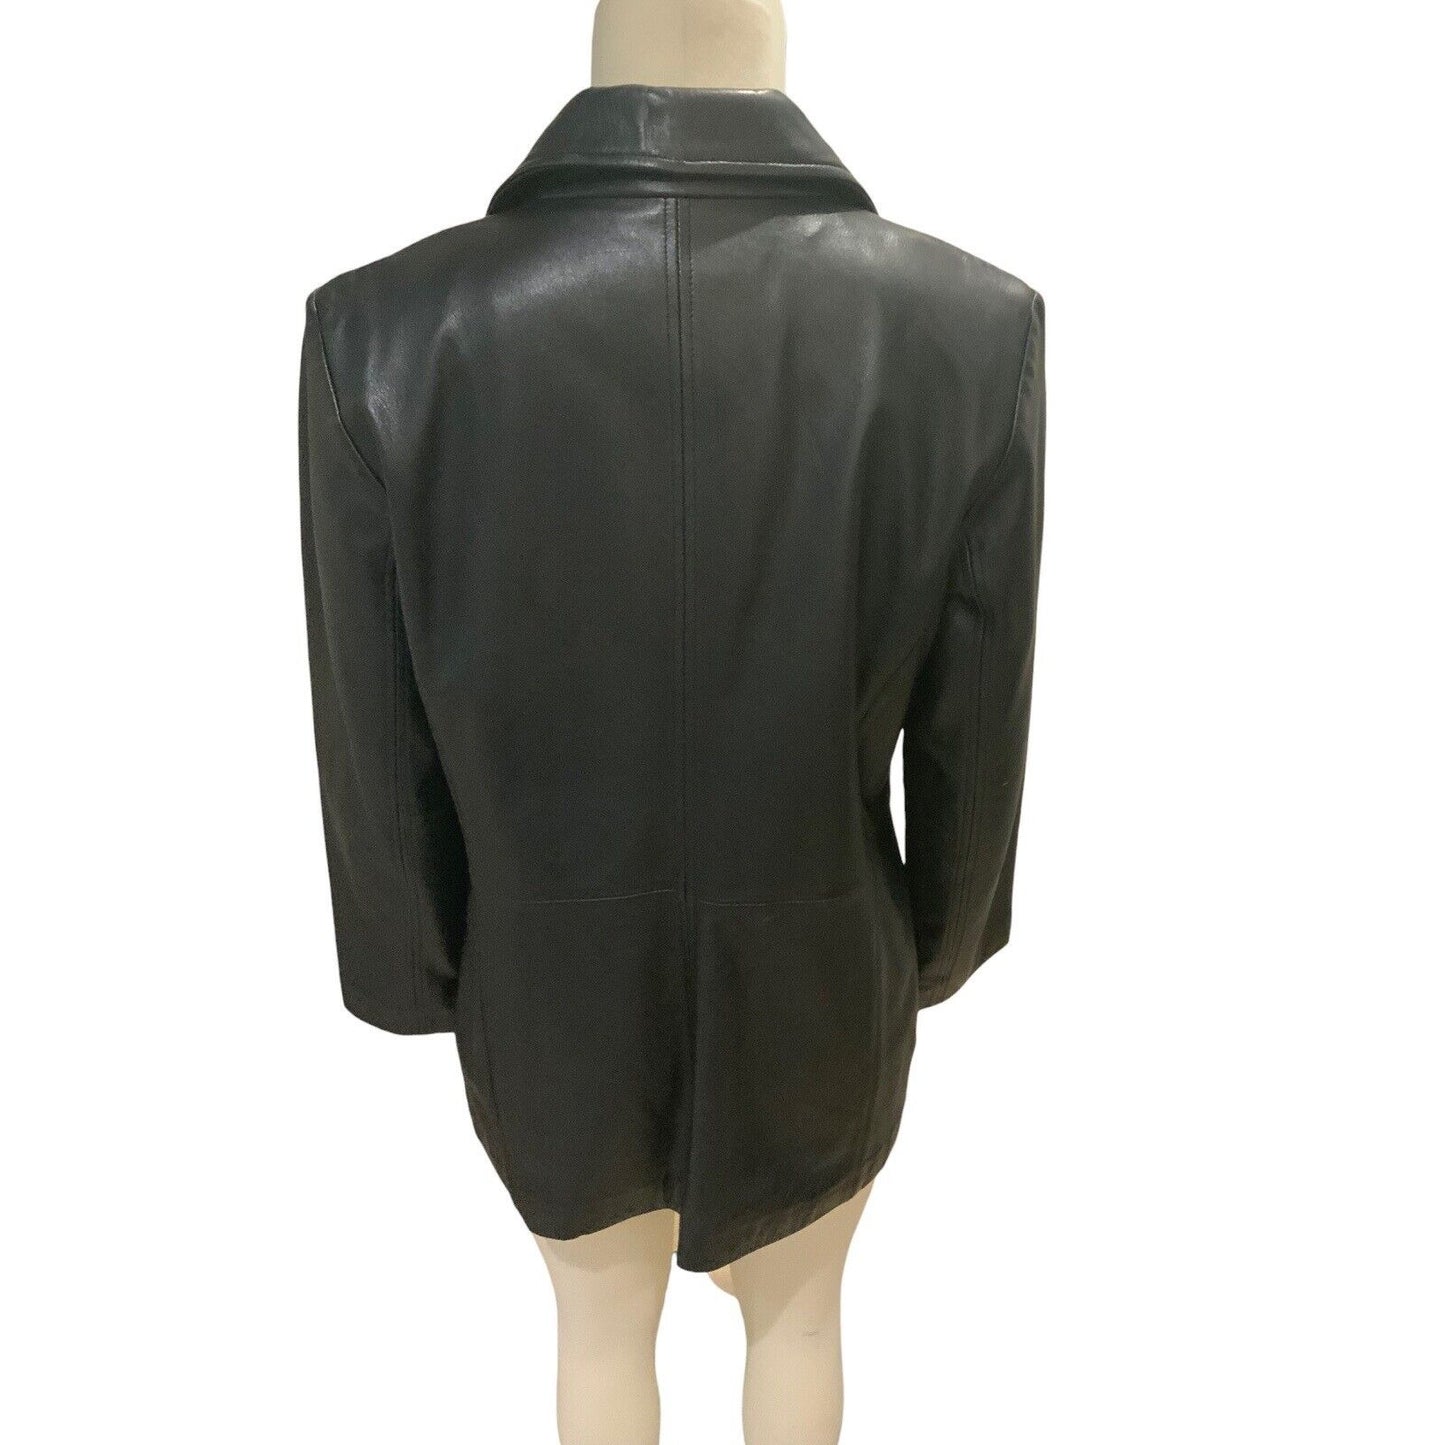 Back View Of Women's Leather Jacket